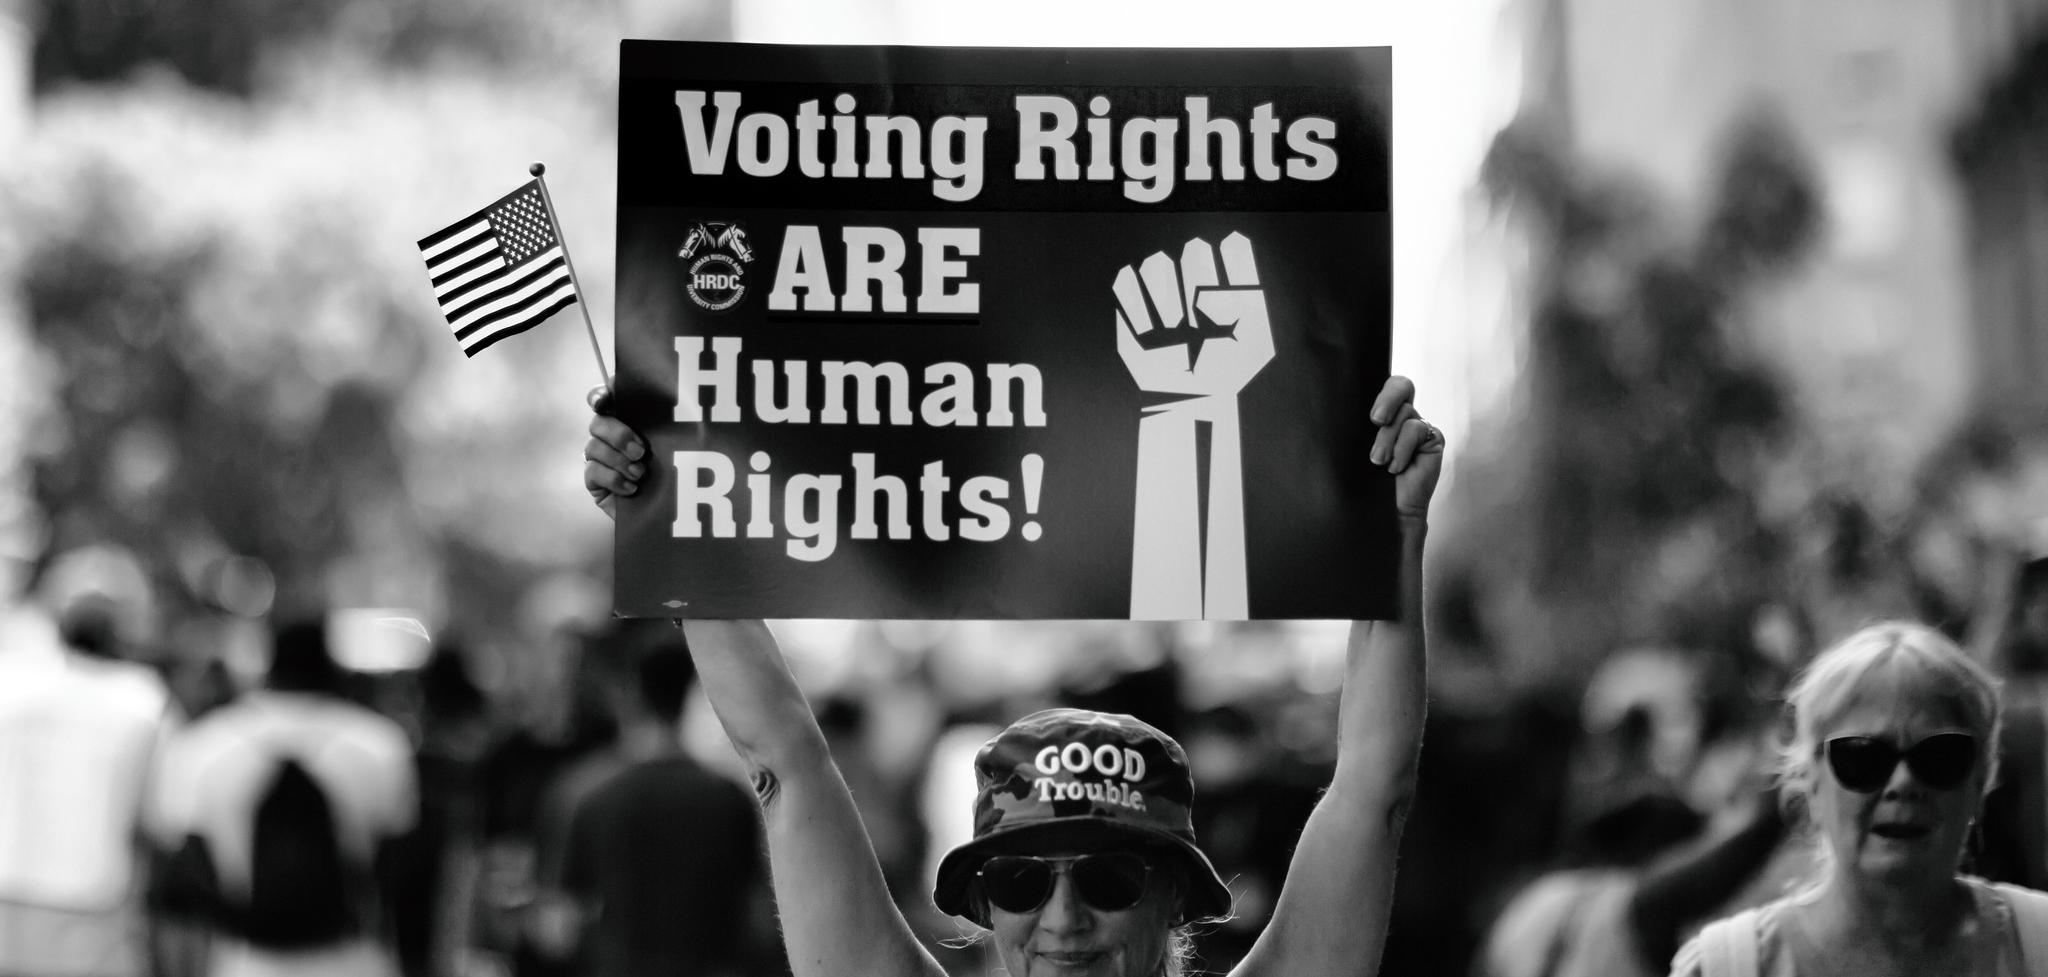 A person holding a banner saying "voting right are human rights!"